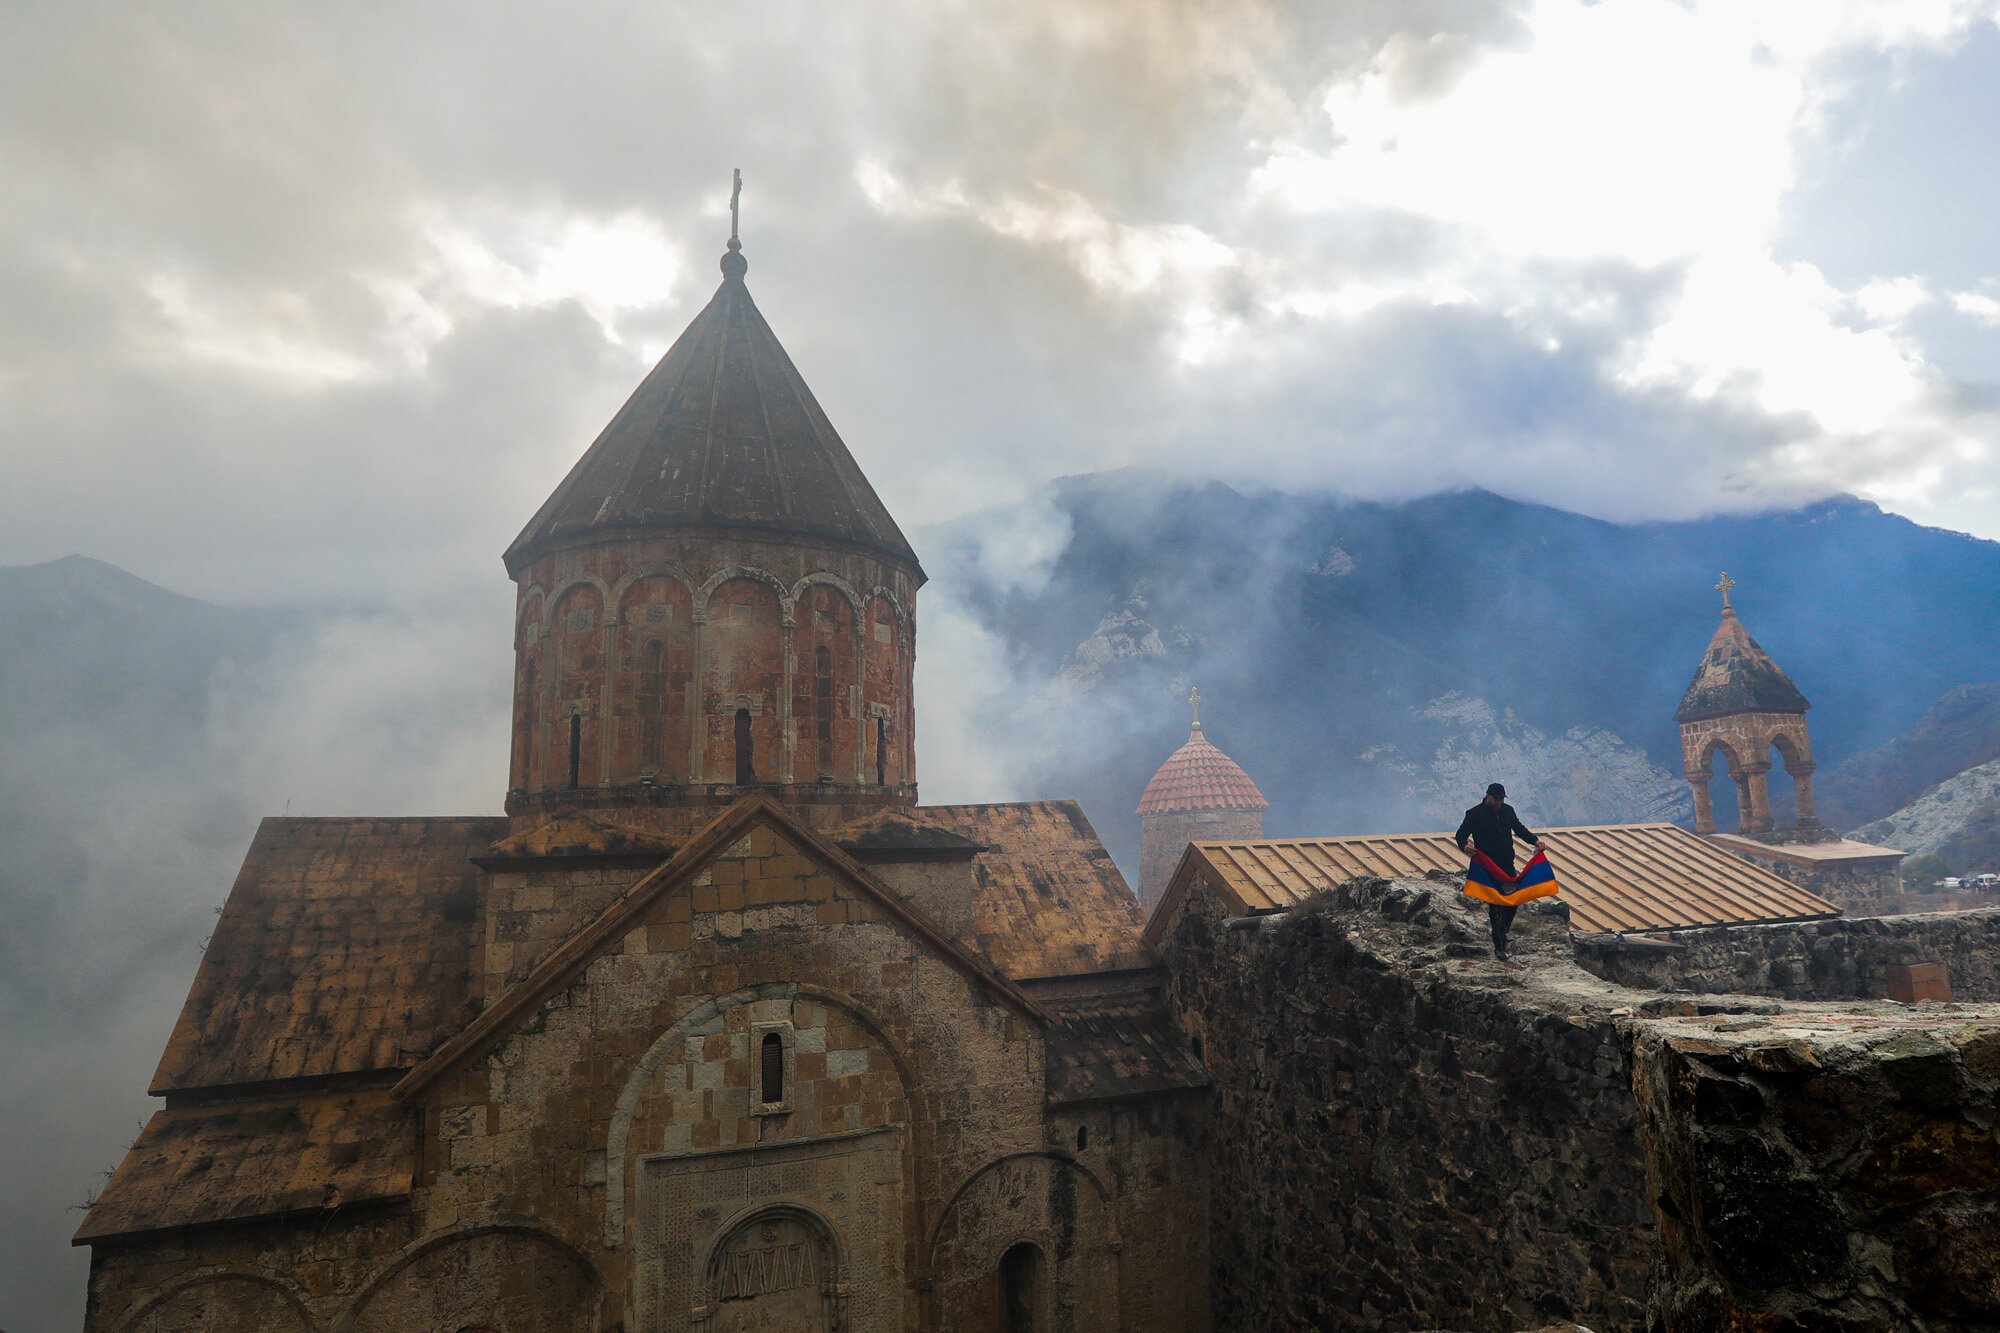  A man with an Armenian national flag visits the 12th-13th century Orthodox Dadivank Monastery on the outskirts of Kalbajar, in the separatist region of Nagorno-Karabakh, on Nov. 13, 2020. Under an agreement ending weeks of intense fighting over the 